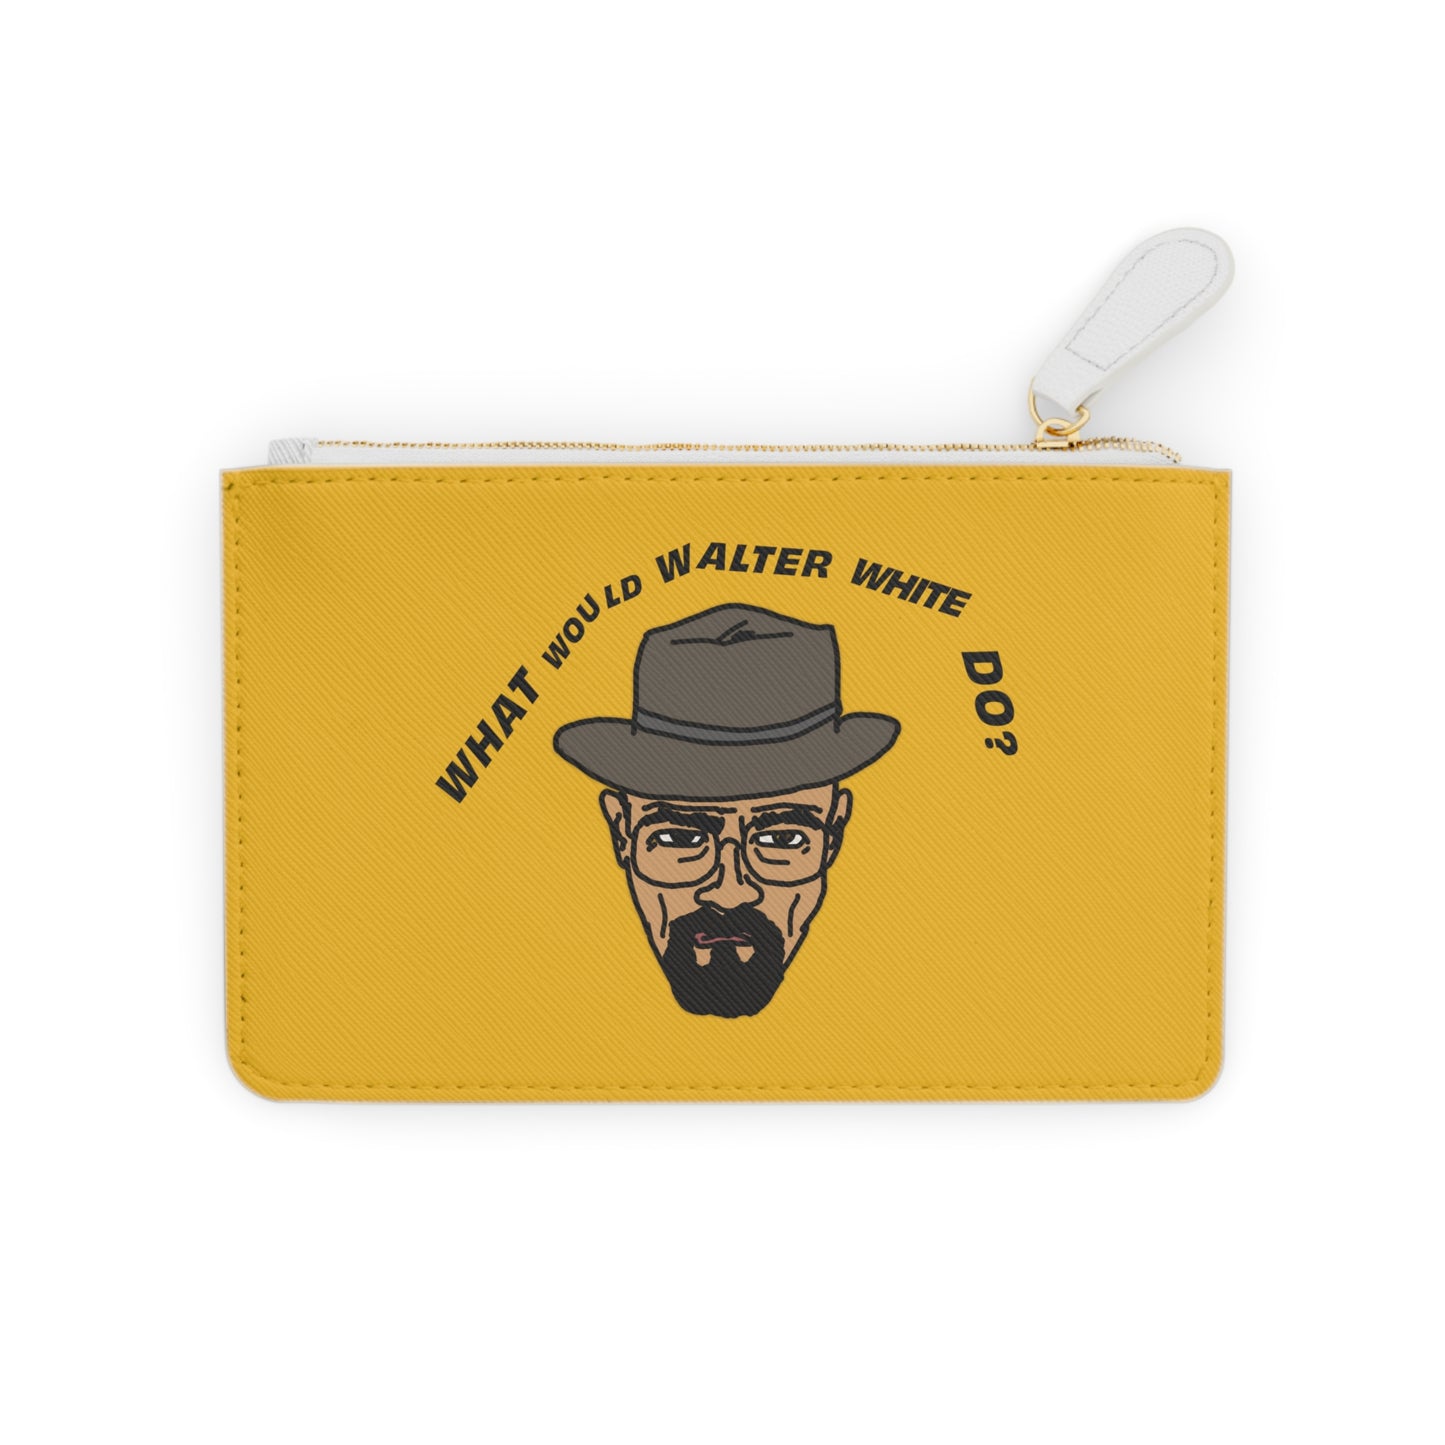 What Would Walter White Do? Mini Clutch Bag